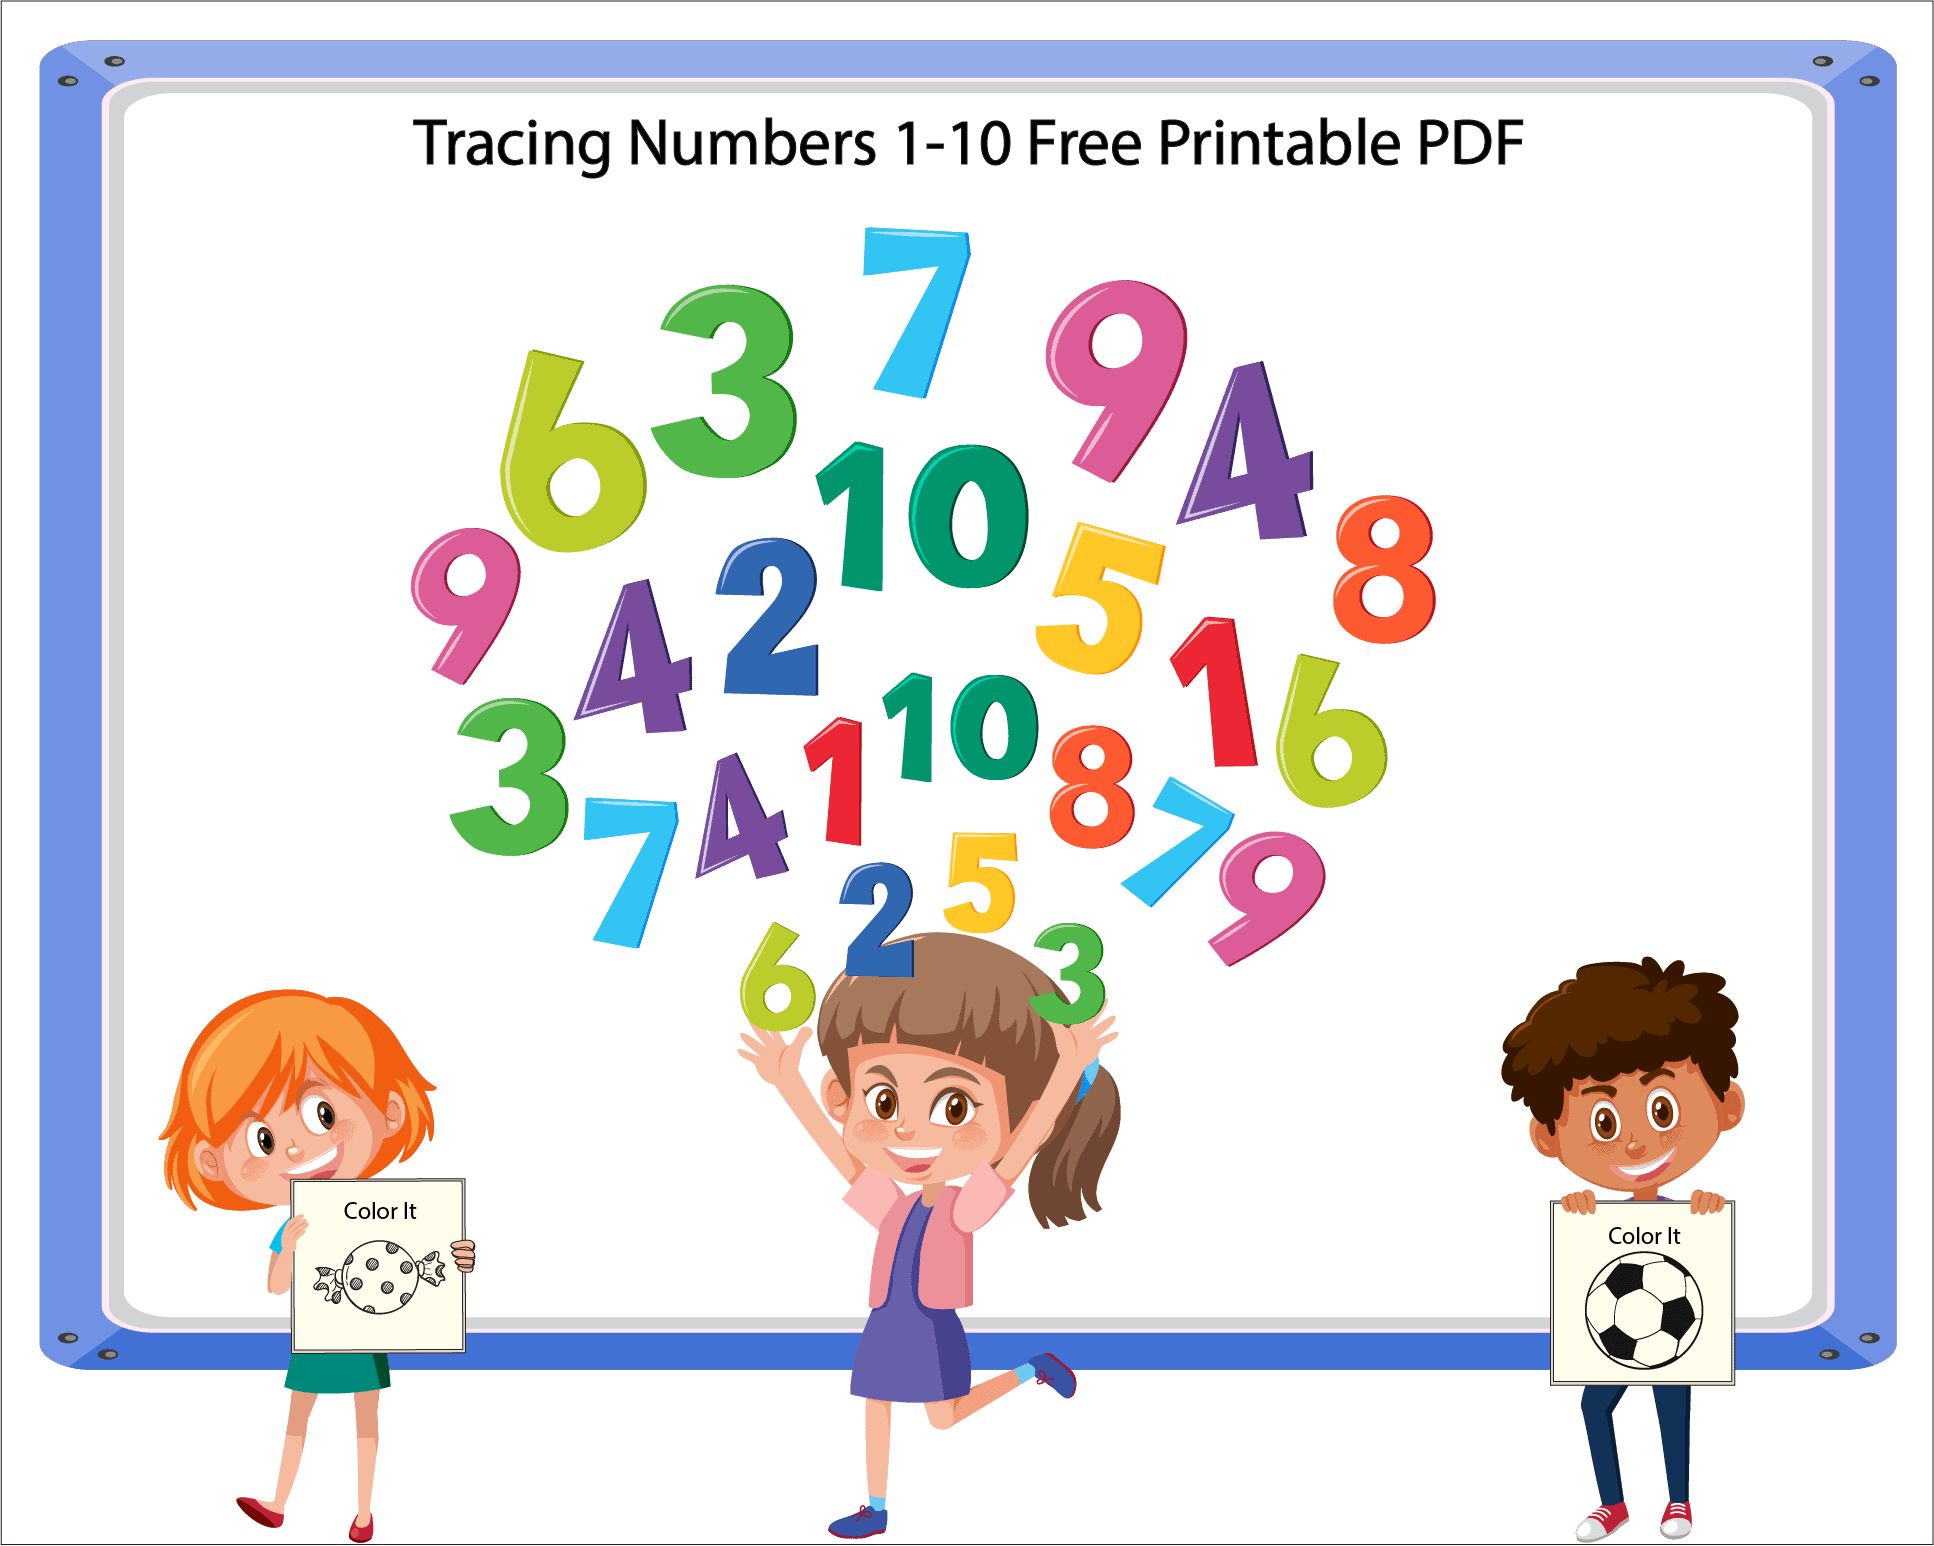 Tracing Numbers 1-10 Free Printable PDF overview